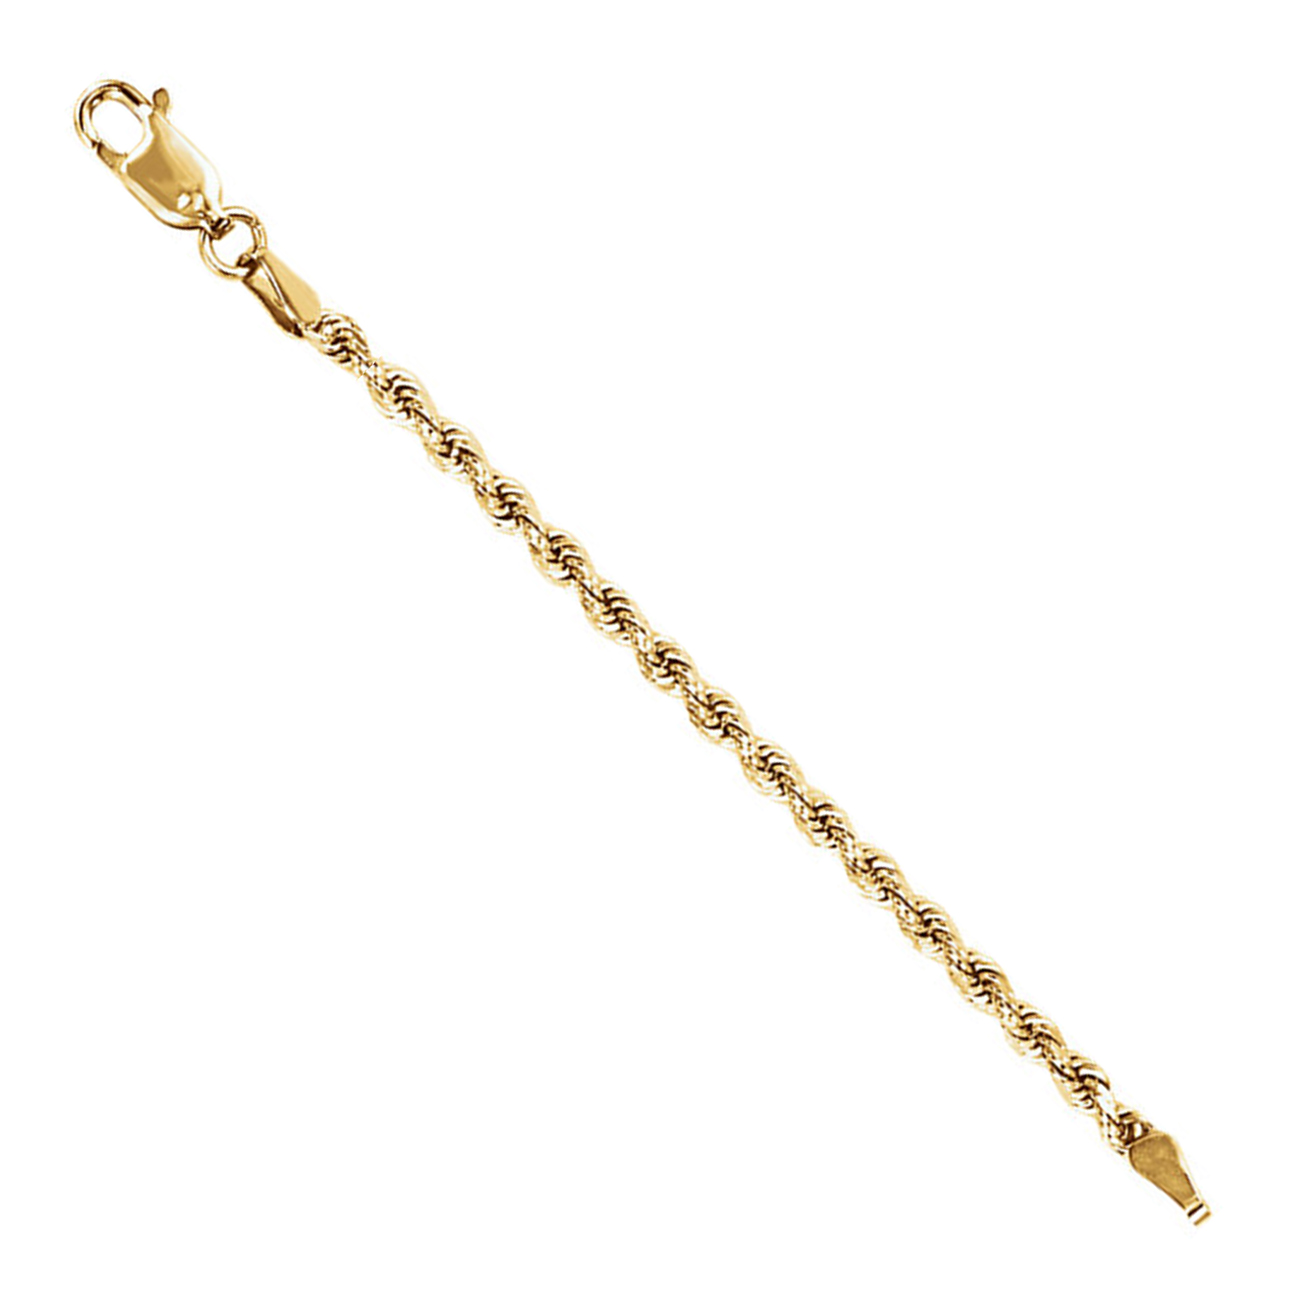 2.25 inch long diamond-cut rope extender-safety chain in 14k yellow gold with a lobster clasp and 2.25 inches long.